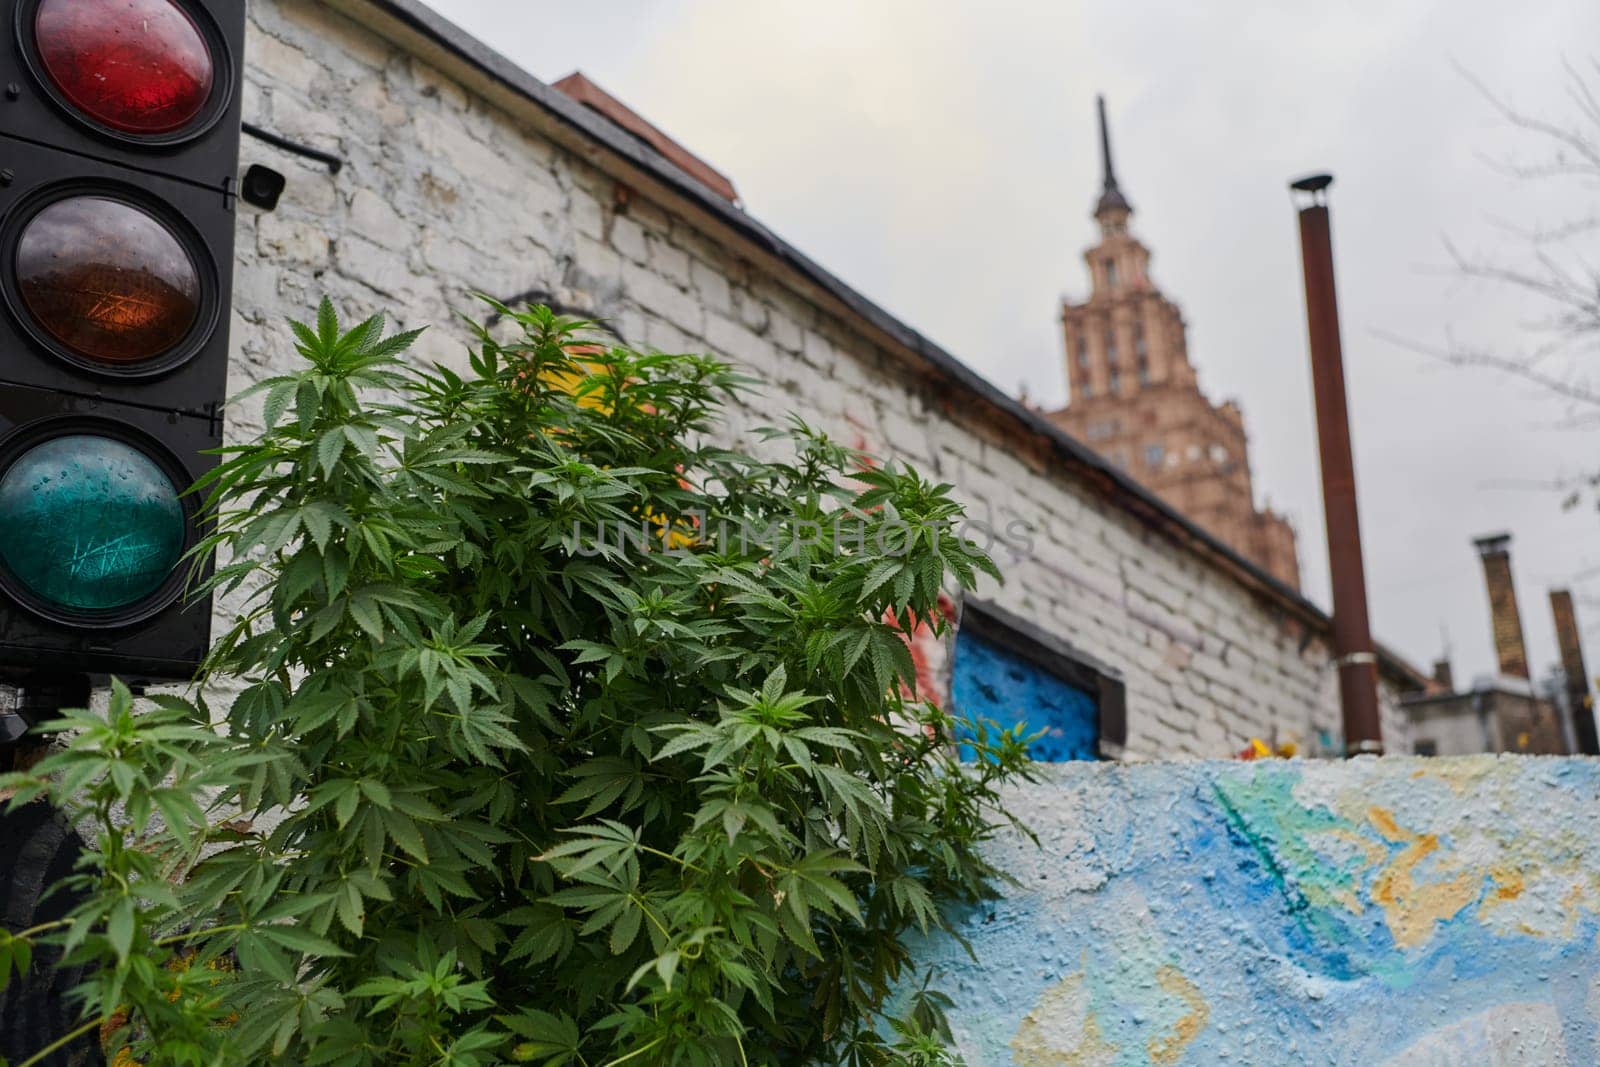 A close-up photo of fresh marijuana leaves in an urban setting, showcasing the vibrant green foliage of the cannabis plant amidst the cityscape. by dotshock